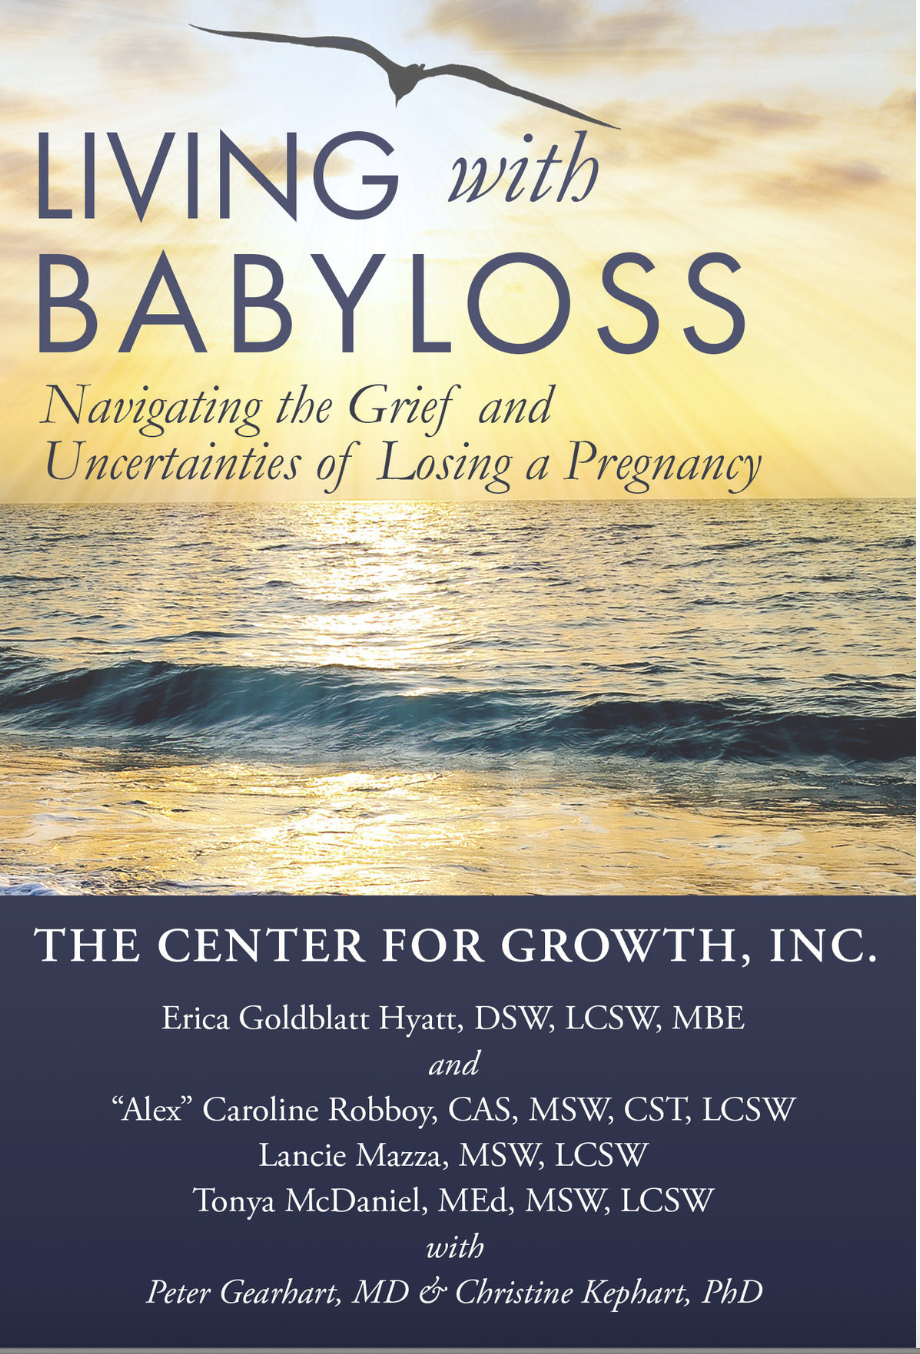 Living with Babyloss: Navigating the grief and uncertainties of losing a pregnancy